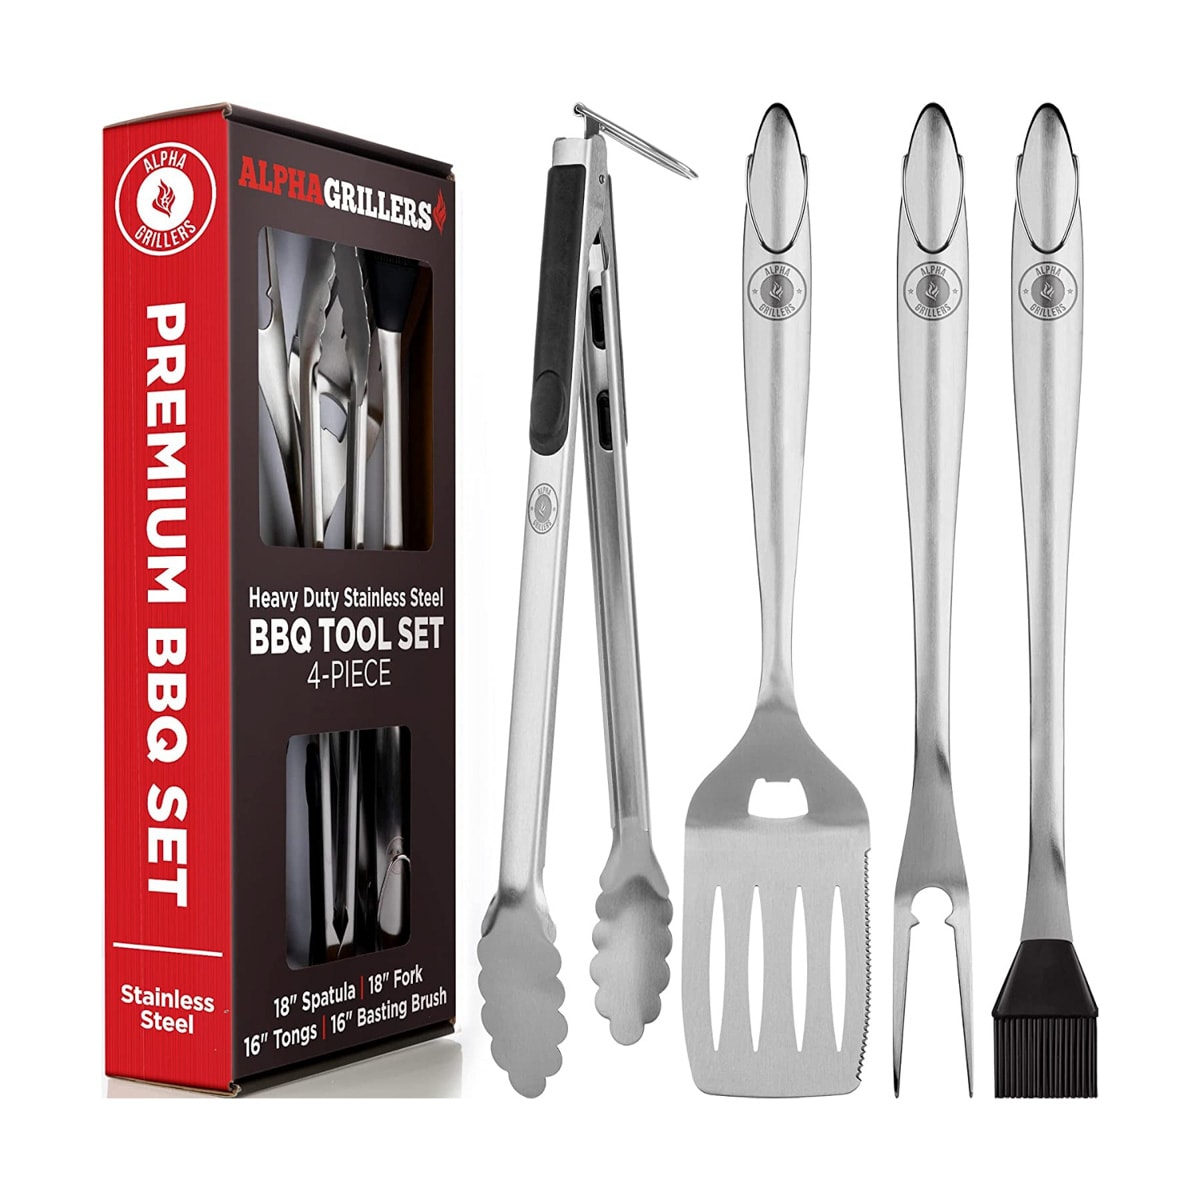 A barbecue tool set that includes stainless steel tongs, spatula, fork and basting brush.